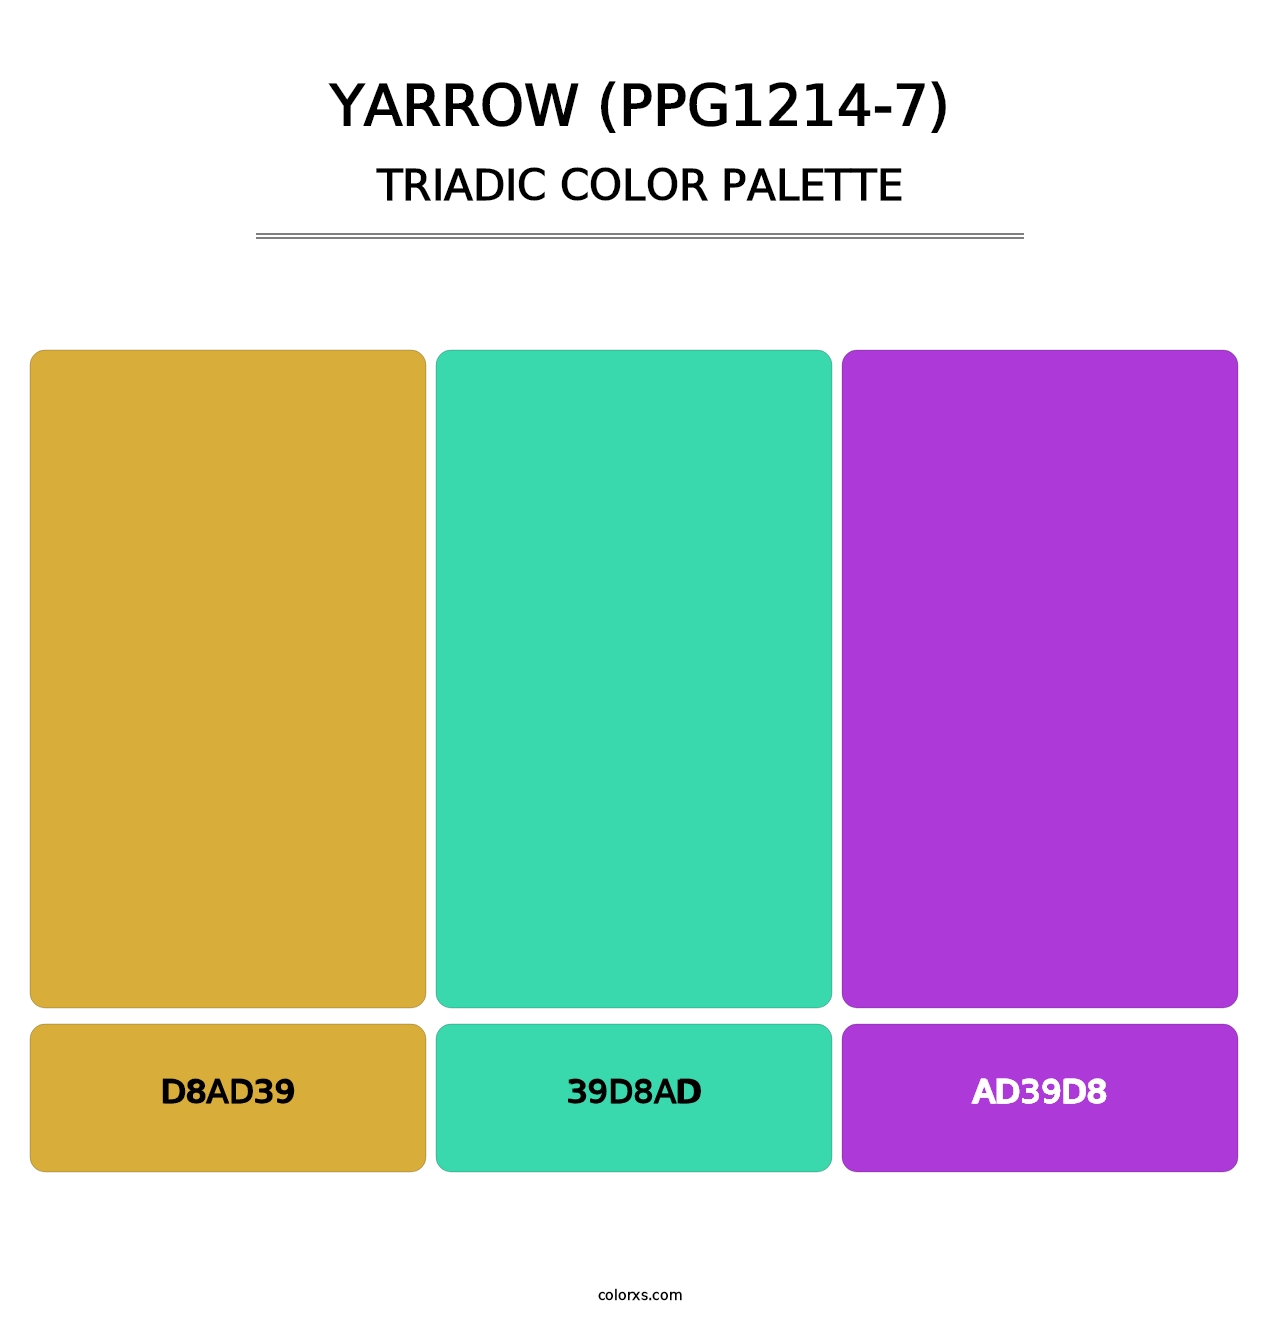 Yarrow (PPG1214-7) - Triadic Color Palette